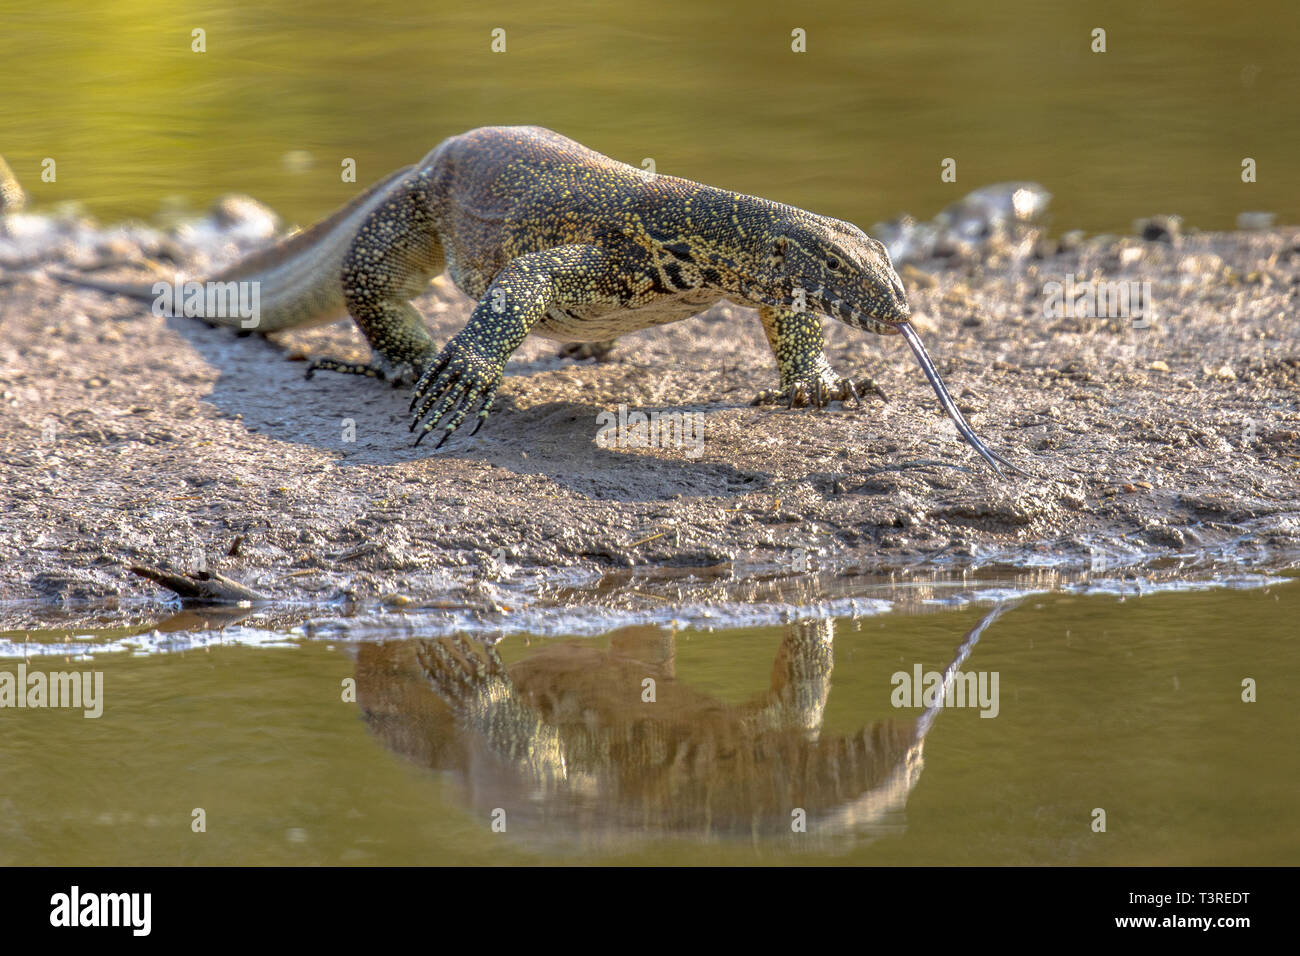 Water monitor (Varanus niloticus) on water edge of river in Kruger national park South Africa Stock Photo